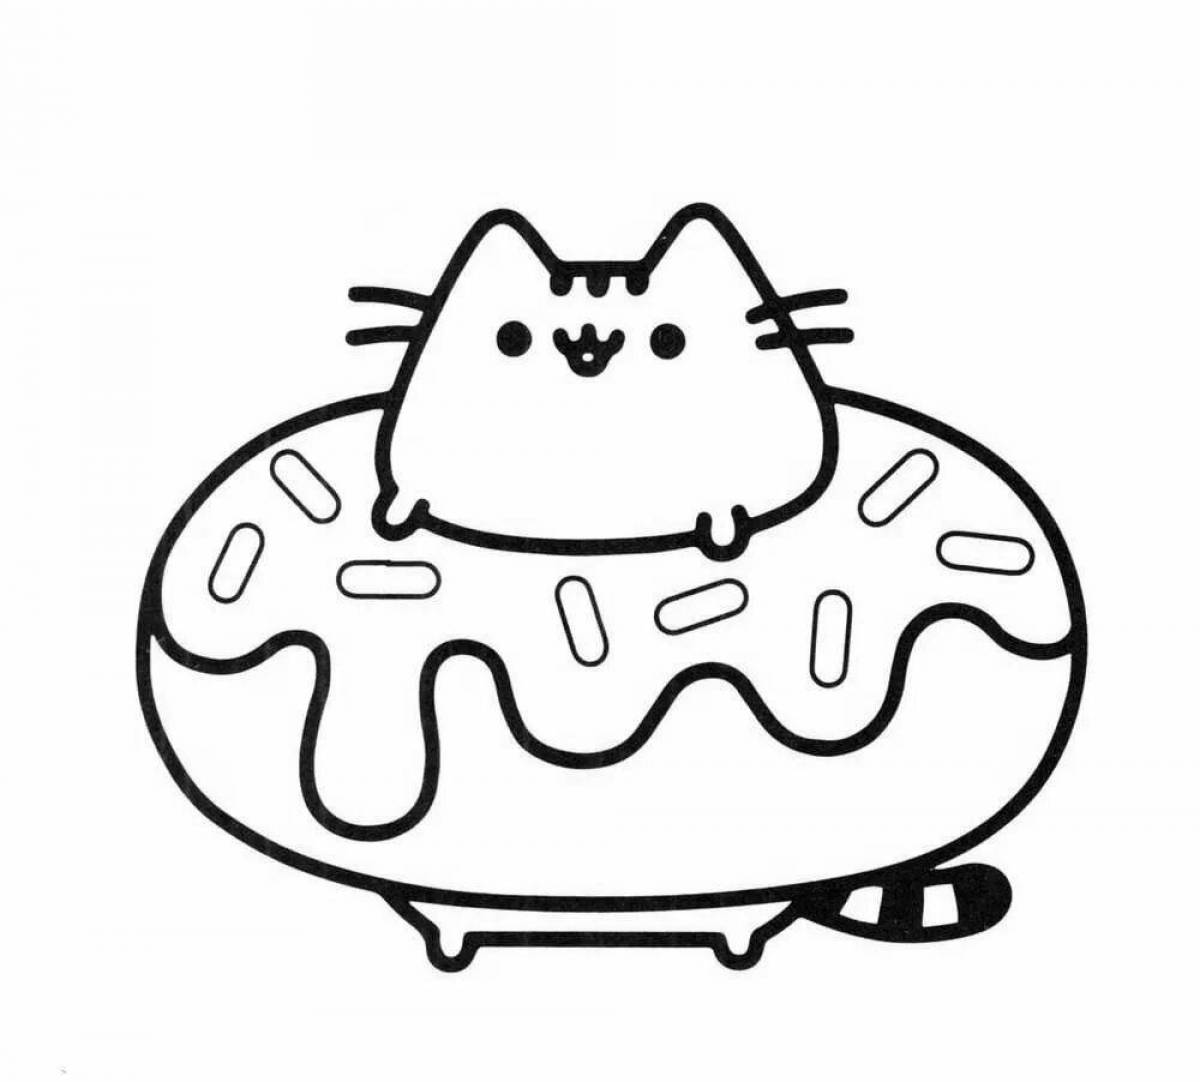 Coloring page chubby cat with a bow